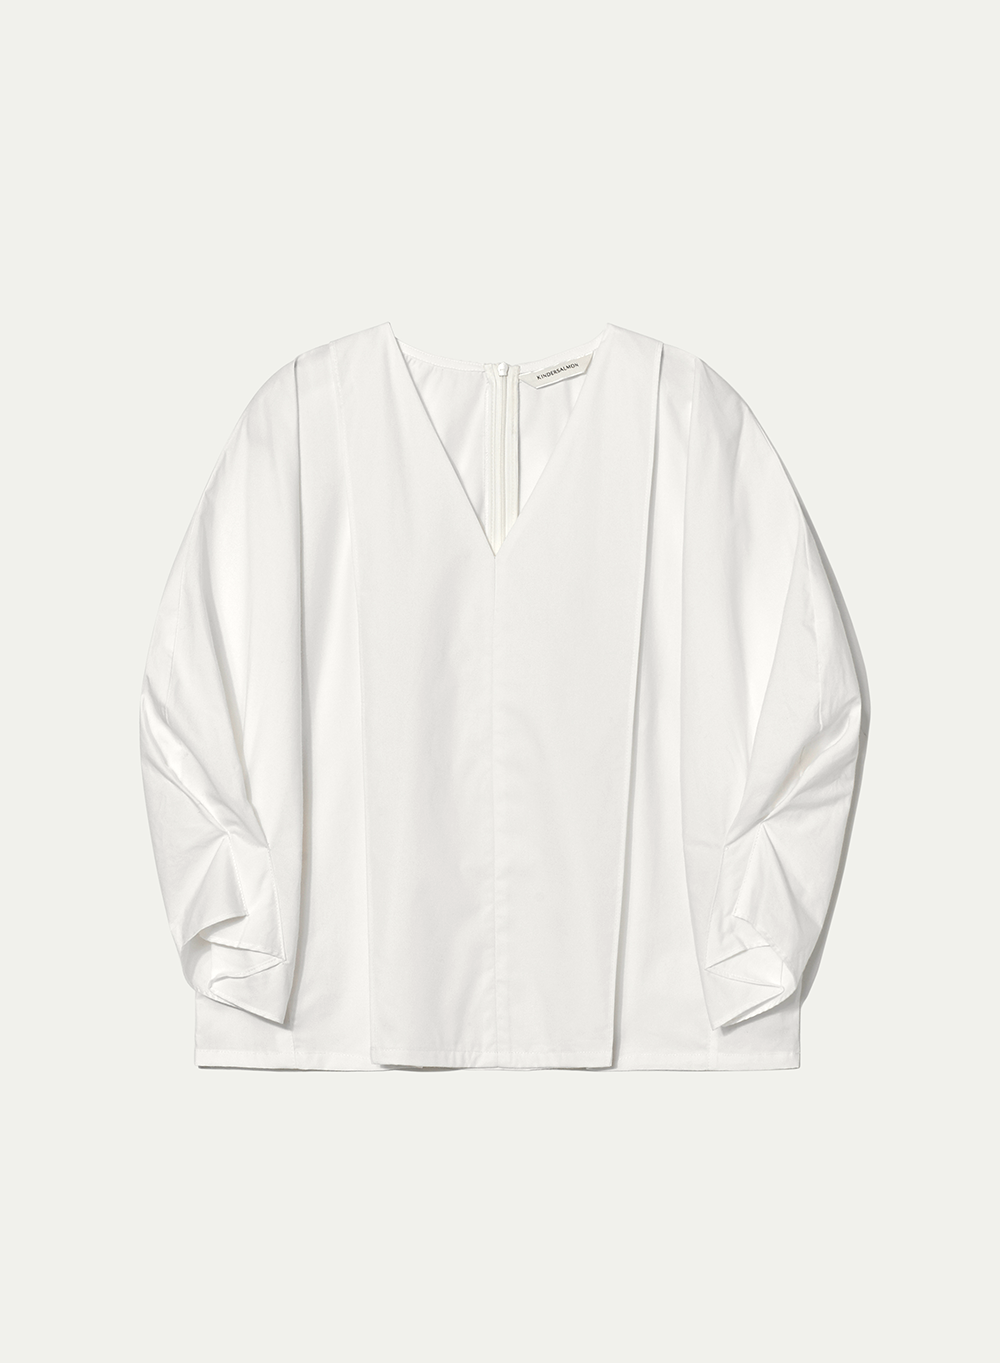 FW18 Cocoon Sleeve Blouse White